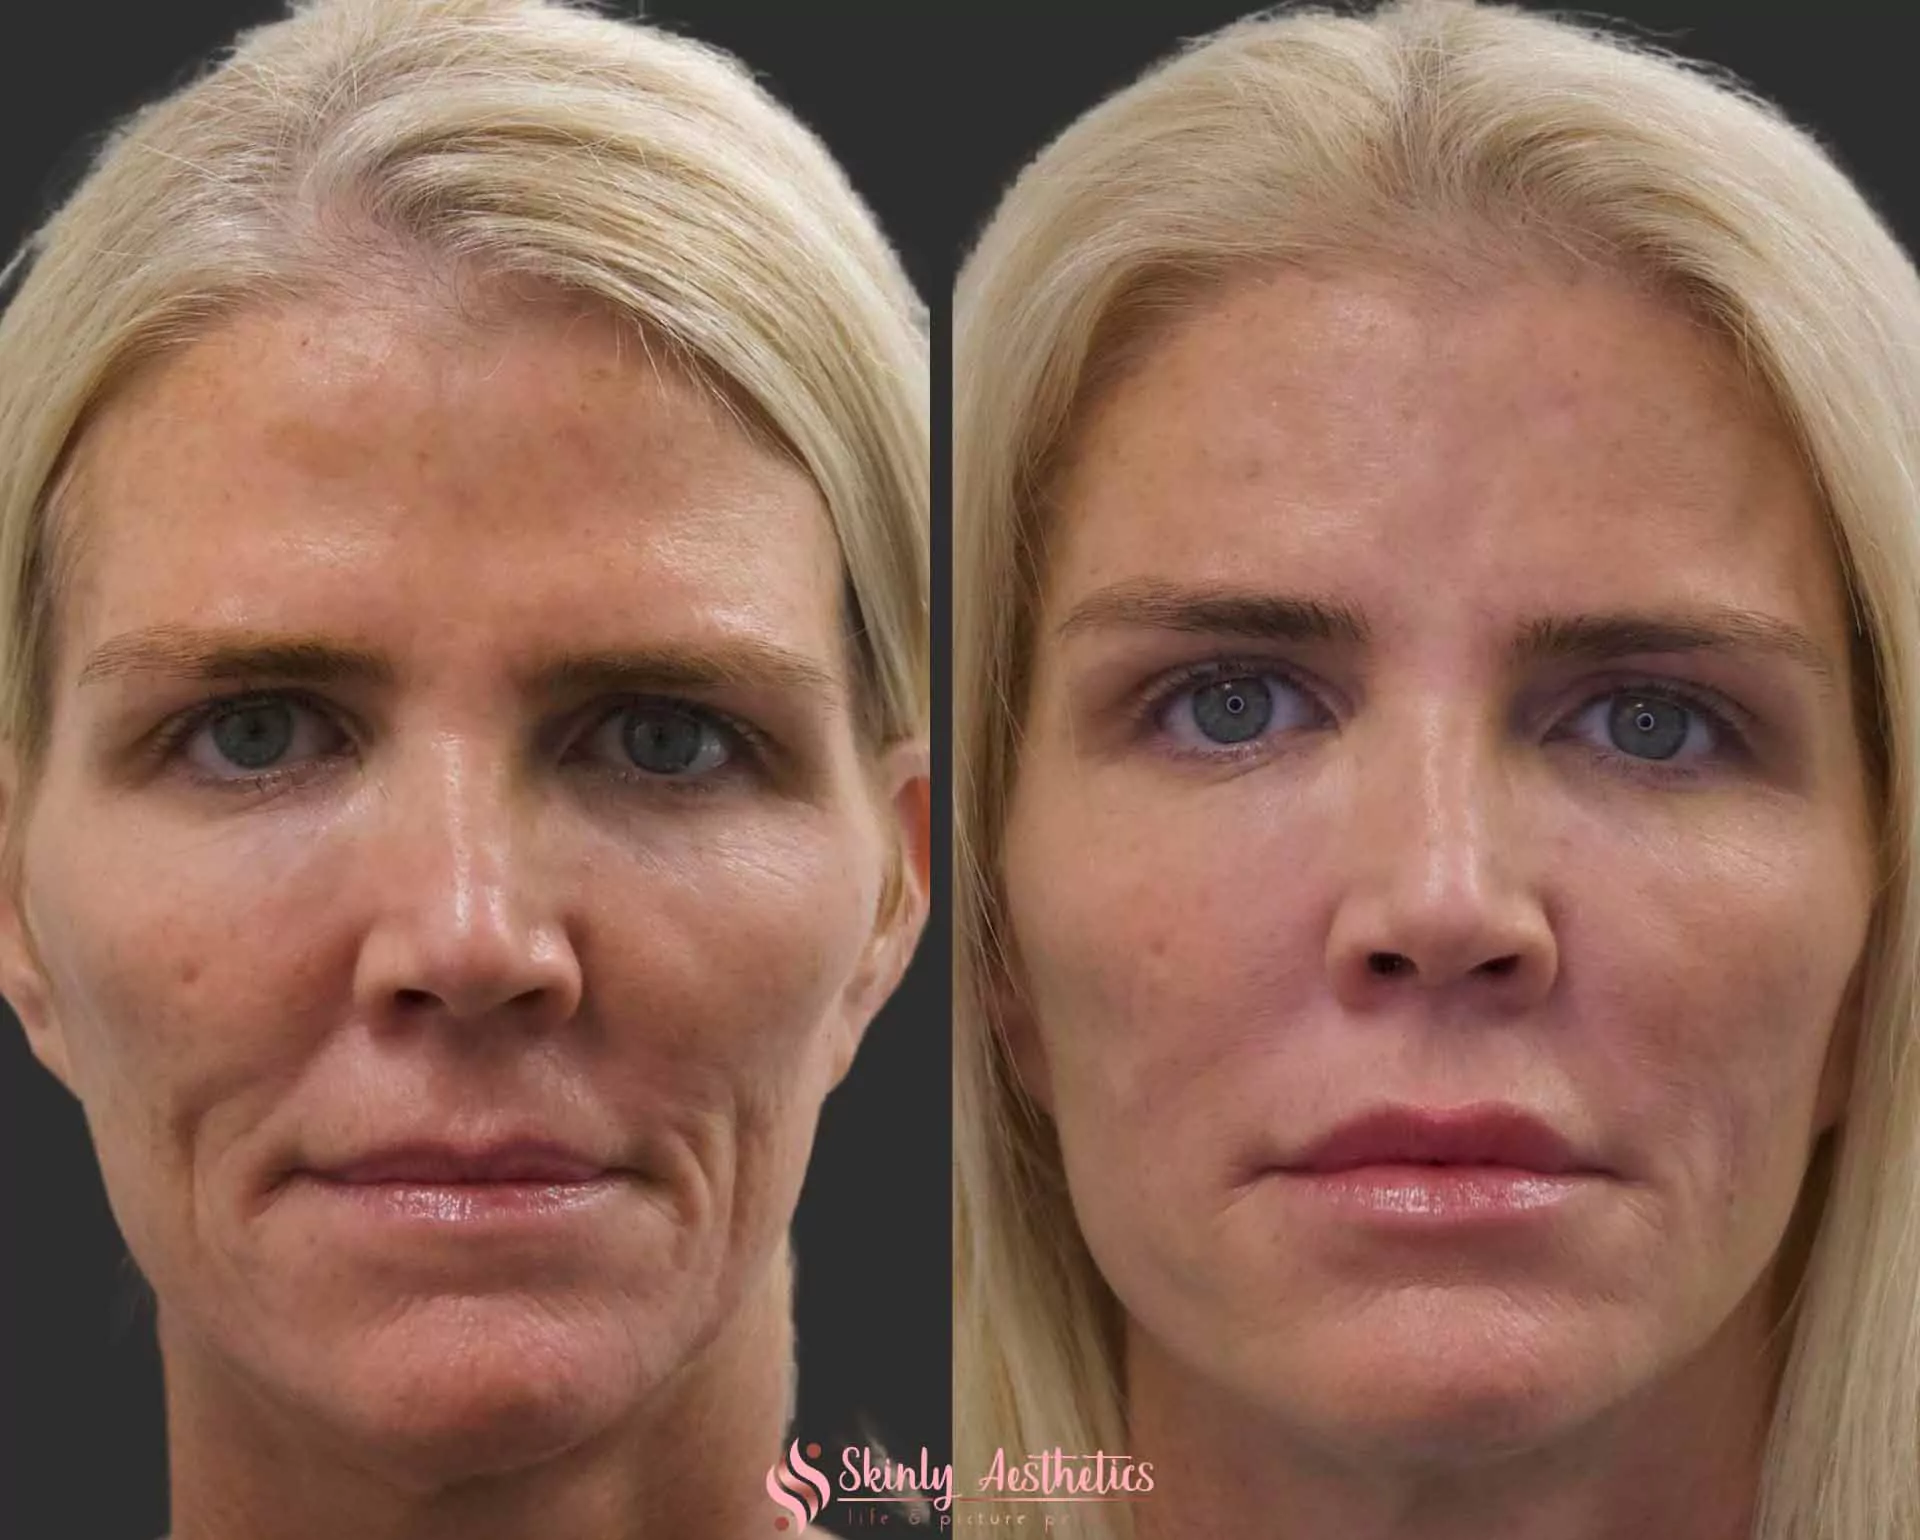 nasolabial fold and marionette lines correction with Juvederm filler